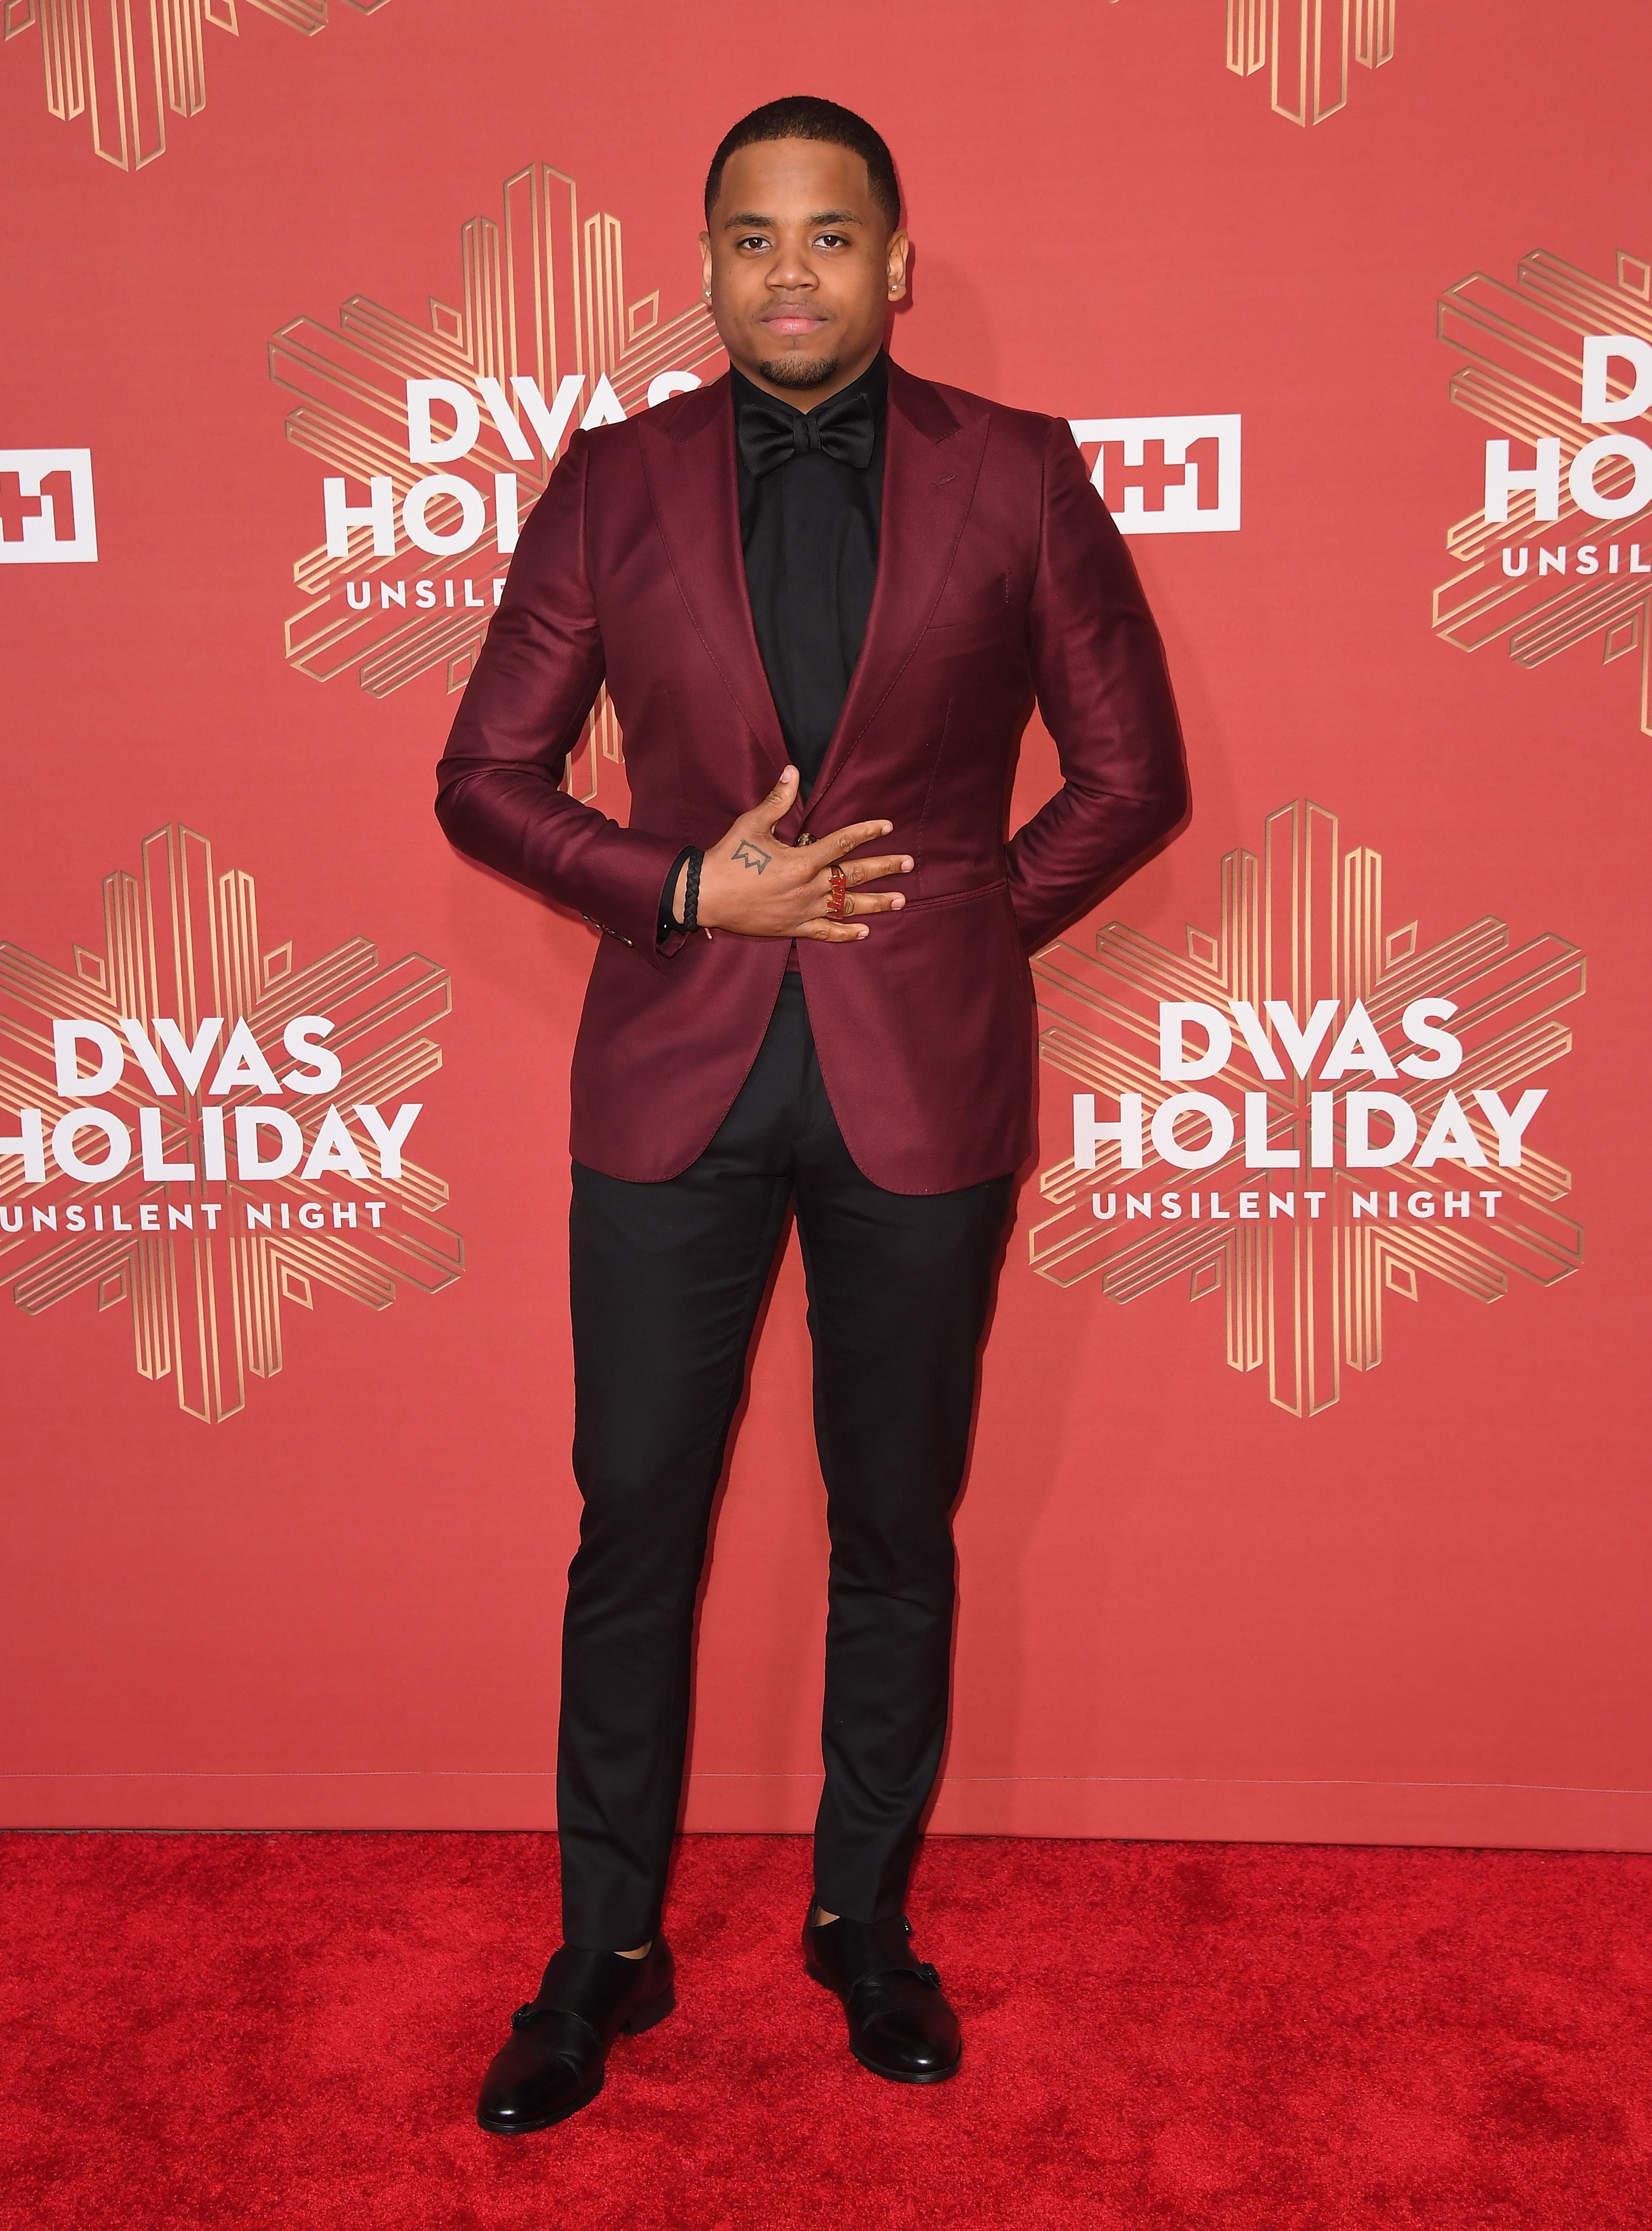 See the Show-Stopping Looks That Lit Up The VH1 Divas Holiday Red Carpet
